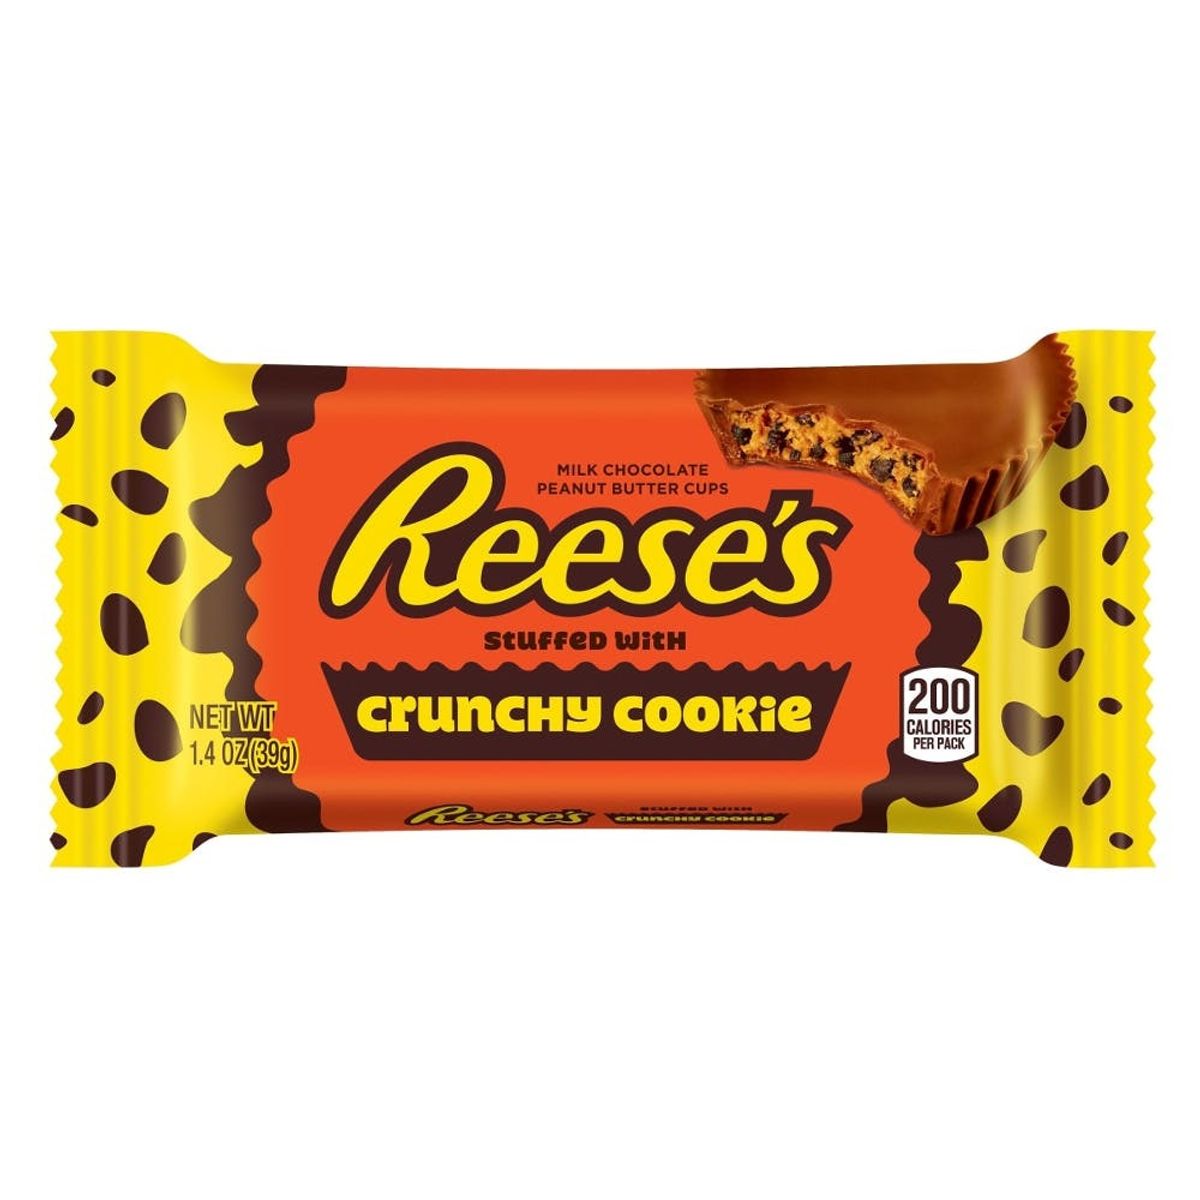 Reese’s New Crunchy Cookie Cups Are Two Yummy Treats in One Delicious Bite